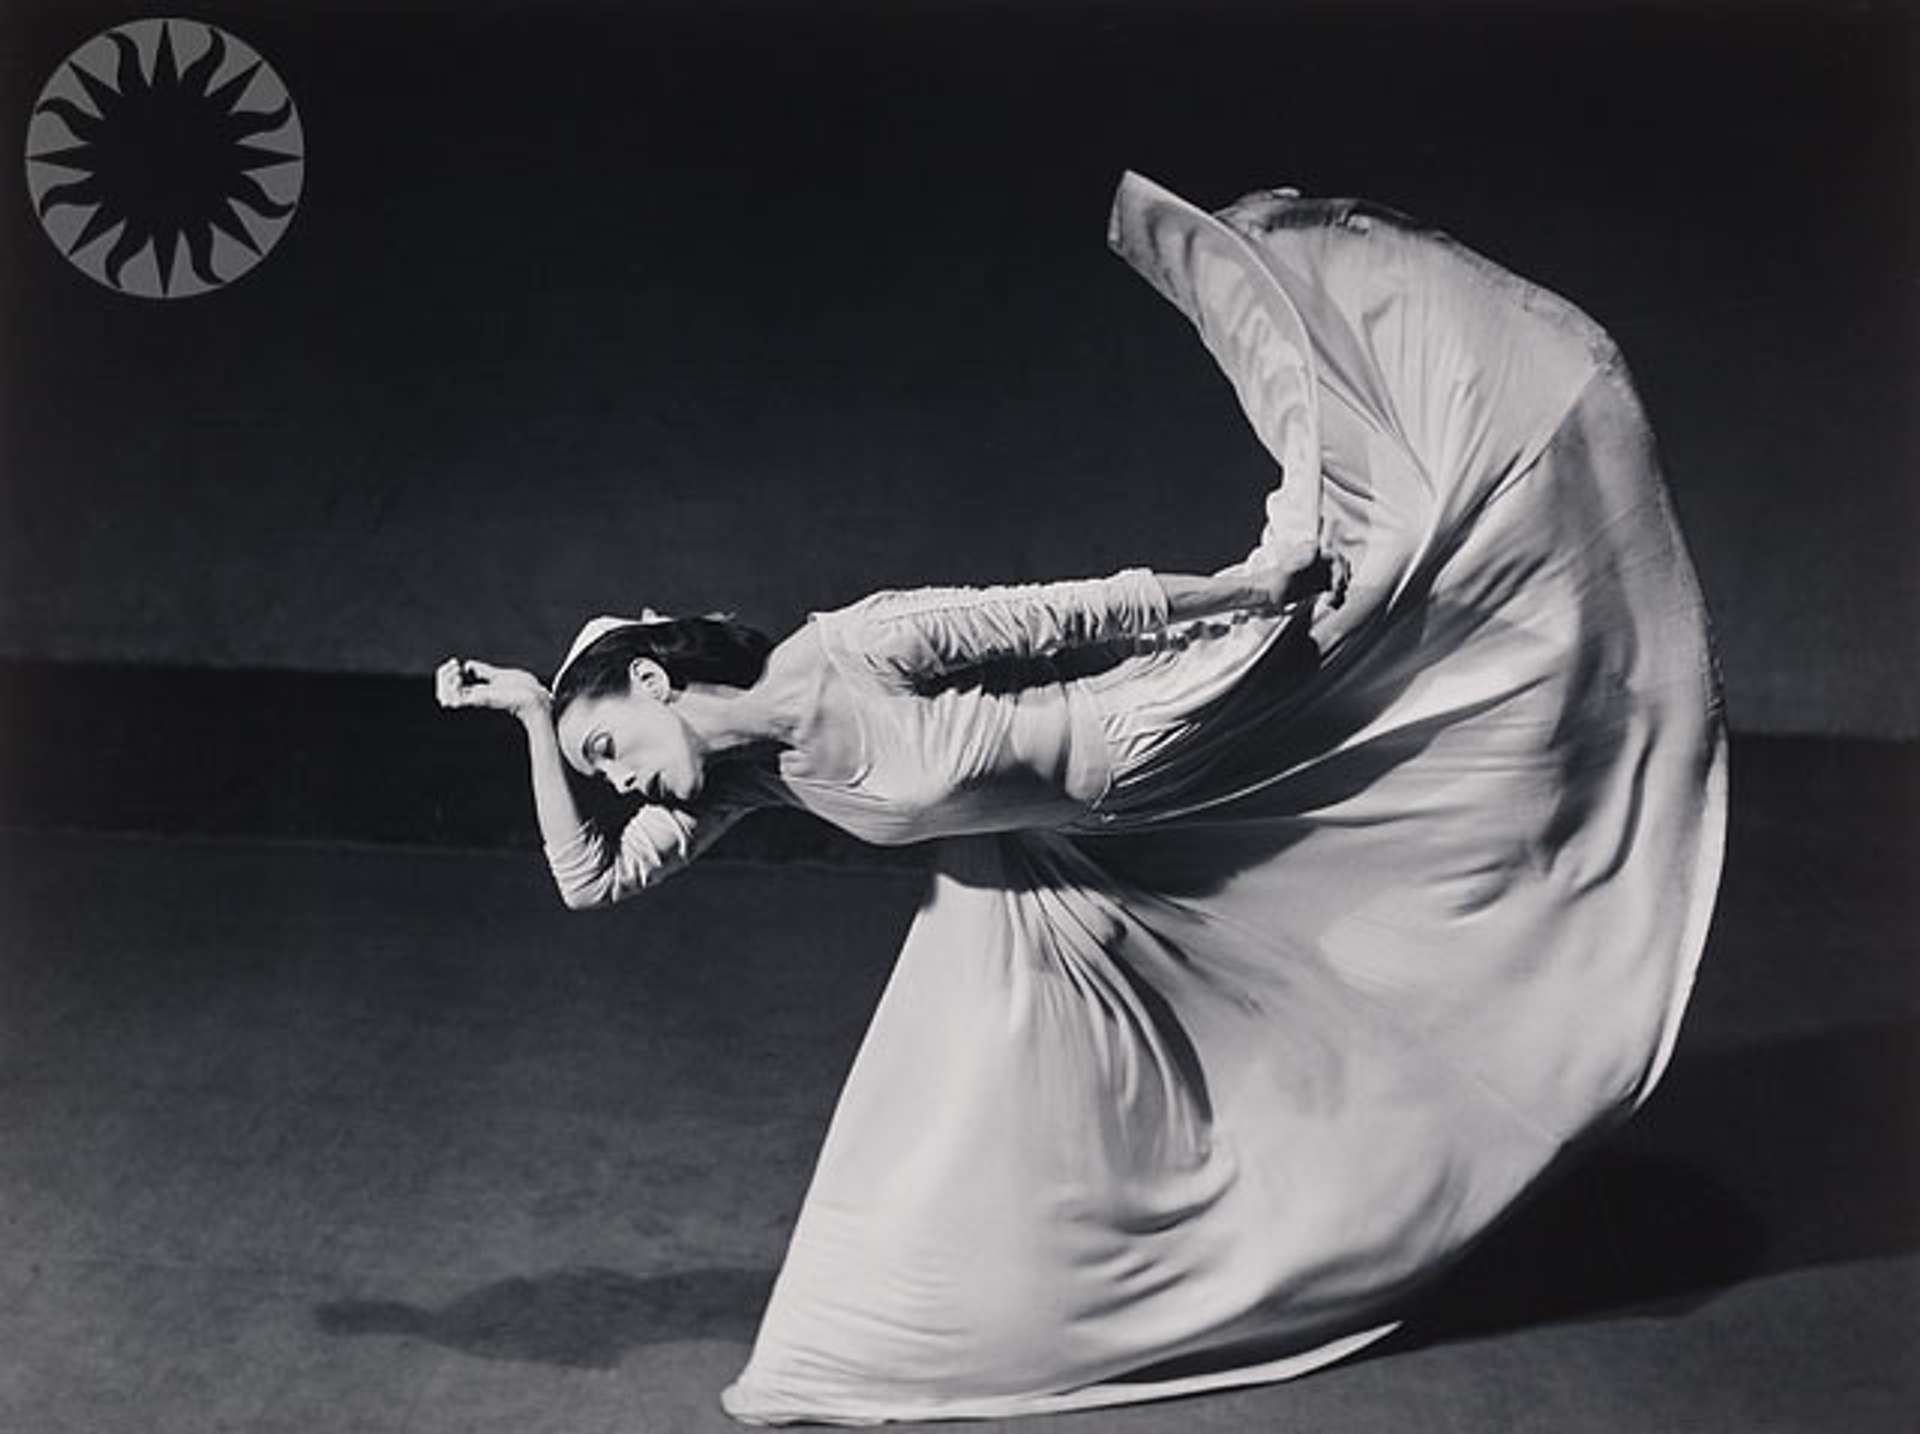 Martha Graham performing “Letter to the World” by Barbara Morgan